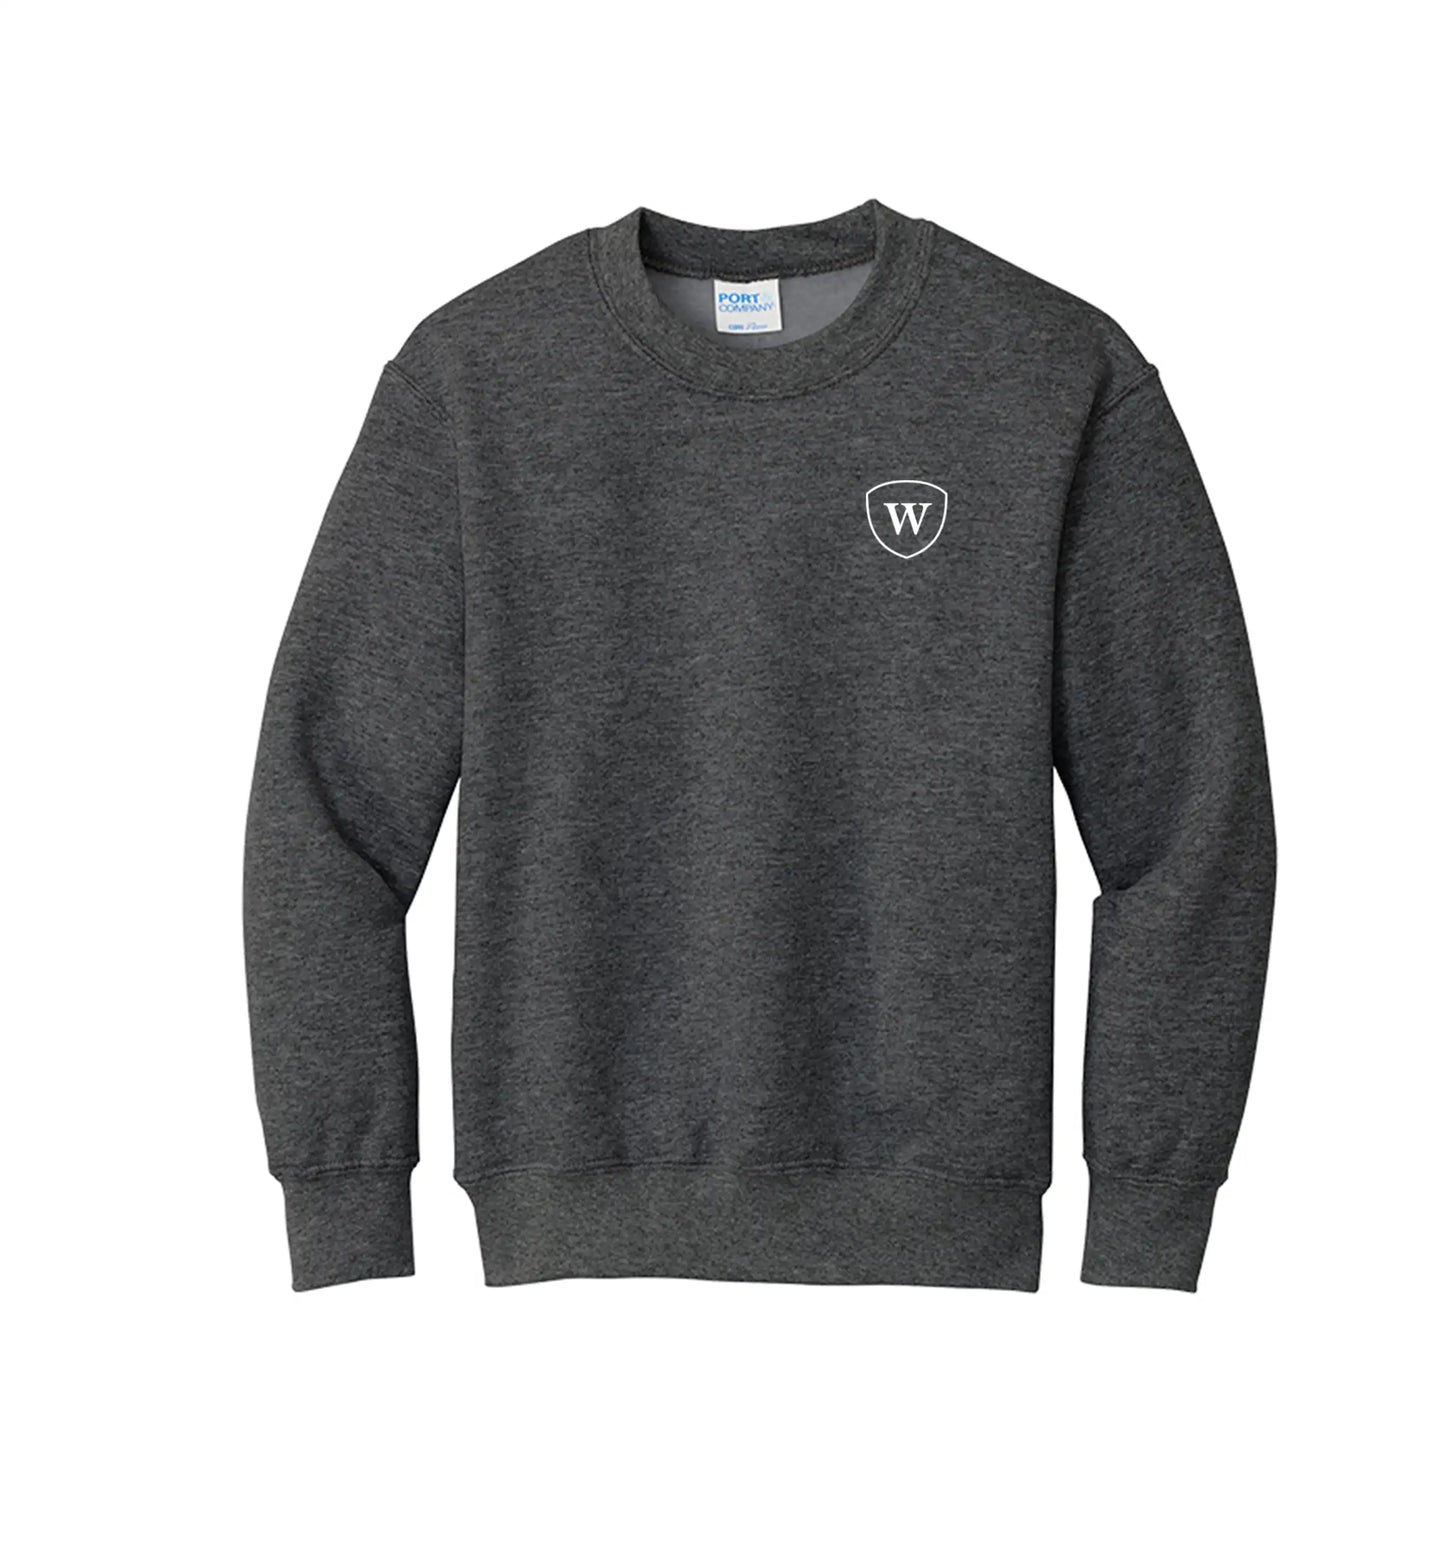 YOUTH Port & Co Uniform-Approved Sweatshirt